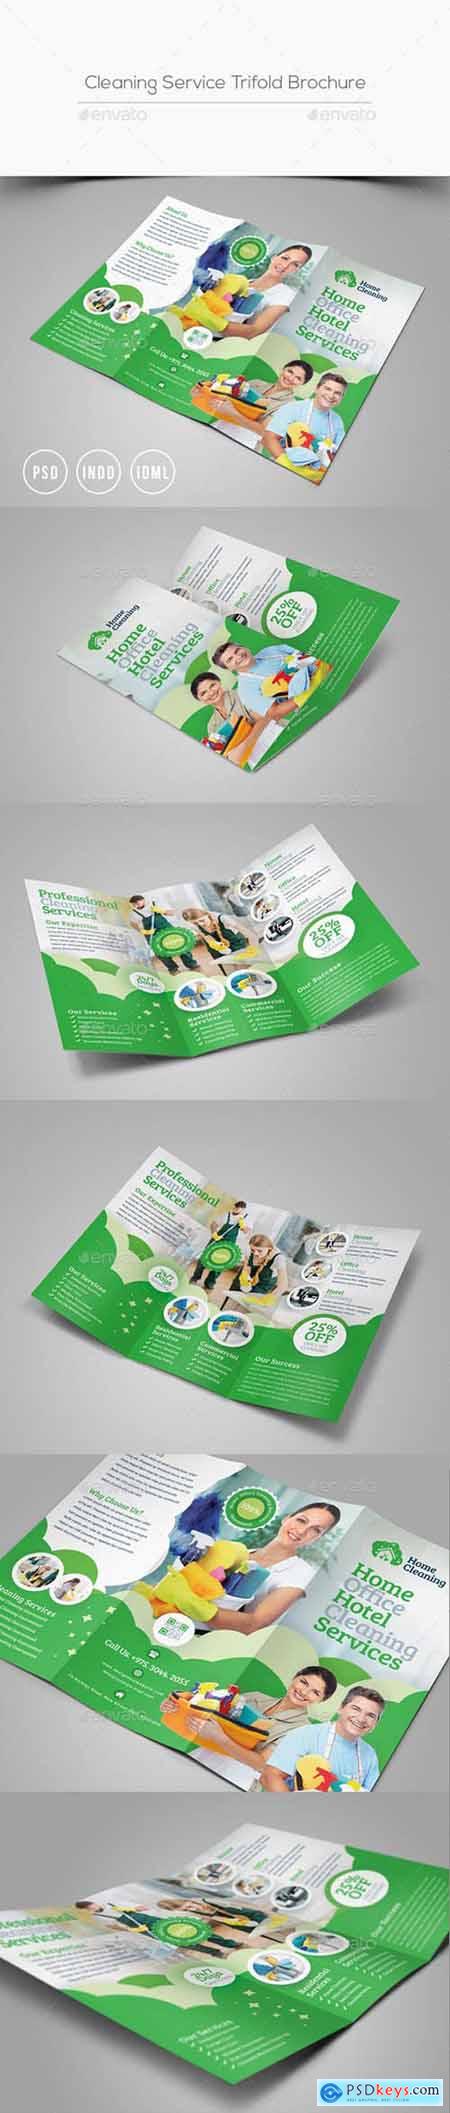 Cleaning Service Trifold Brochure 24572071